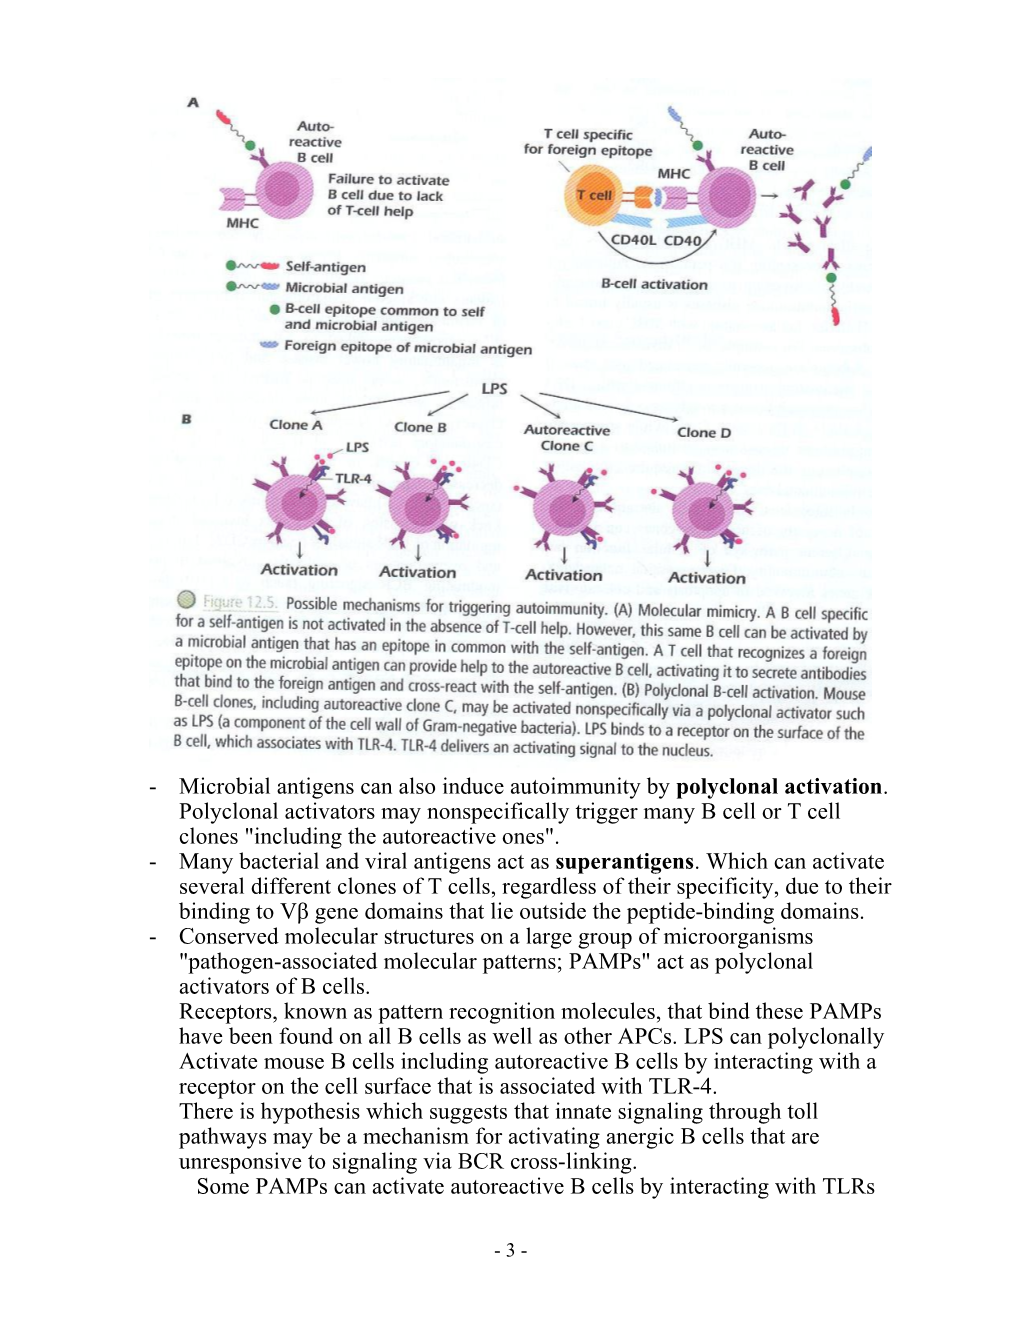 Elements of Innate and Acquired Immunity